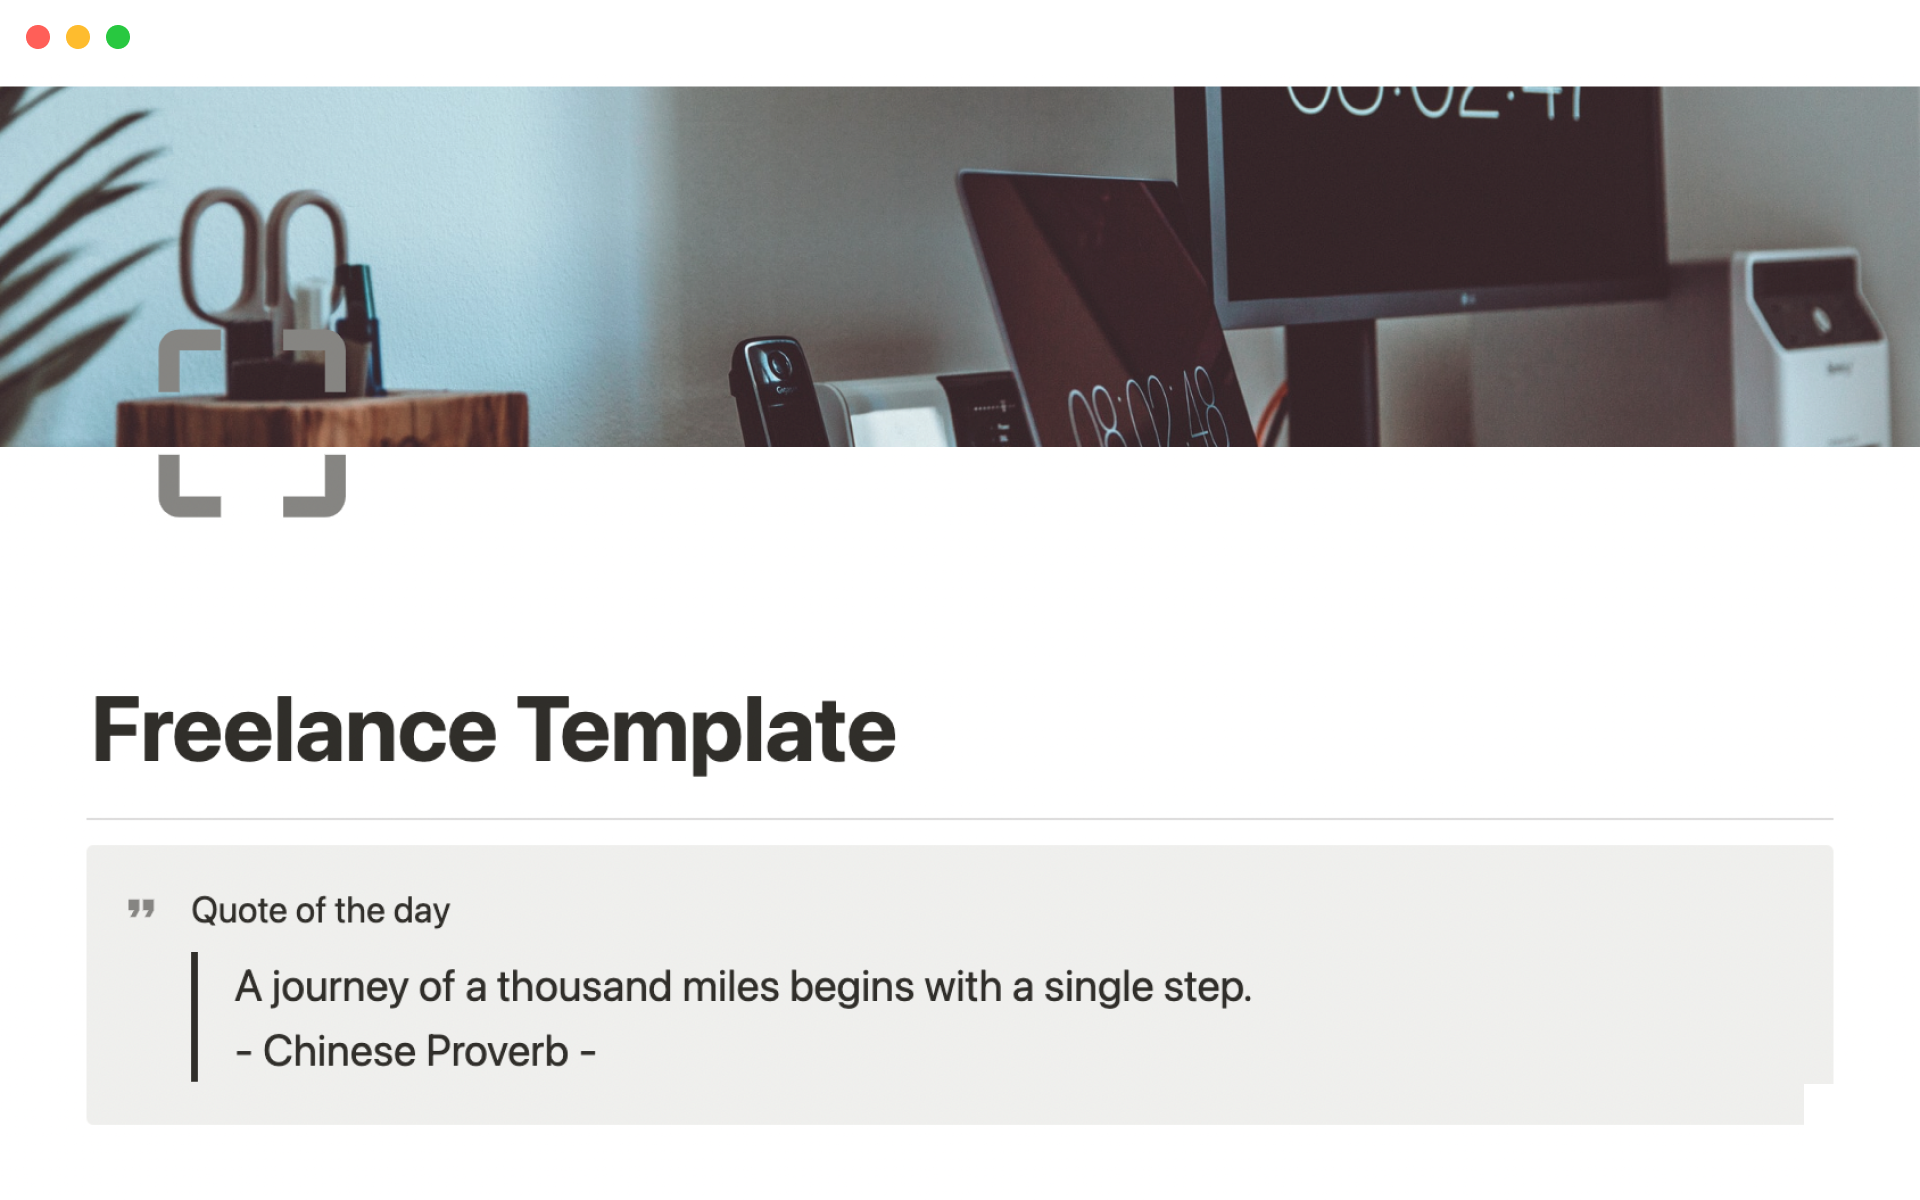 A template to help you organise your freelance business.